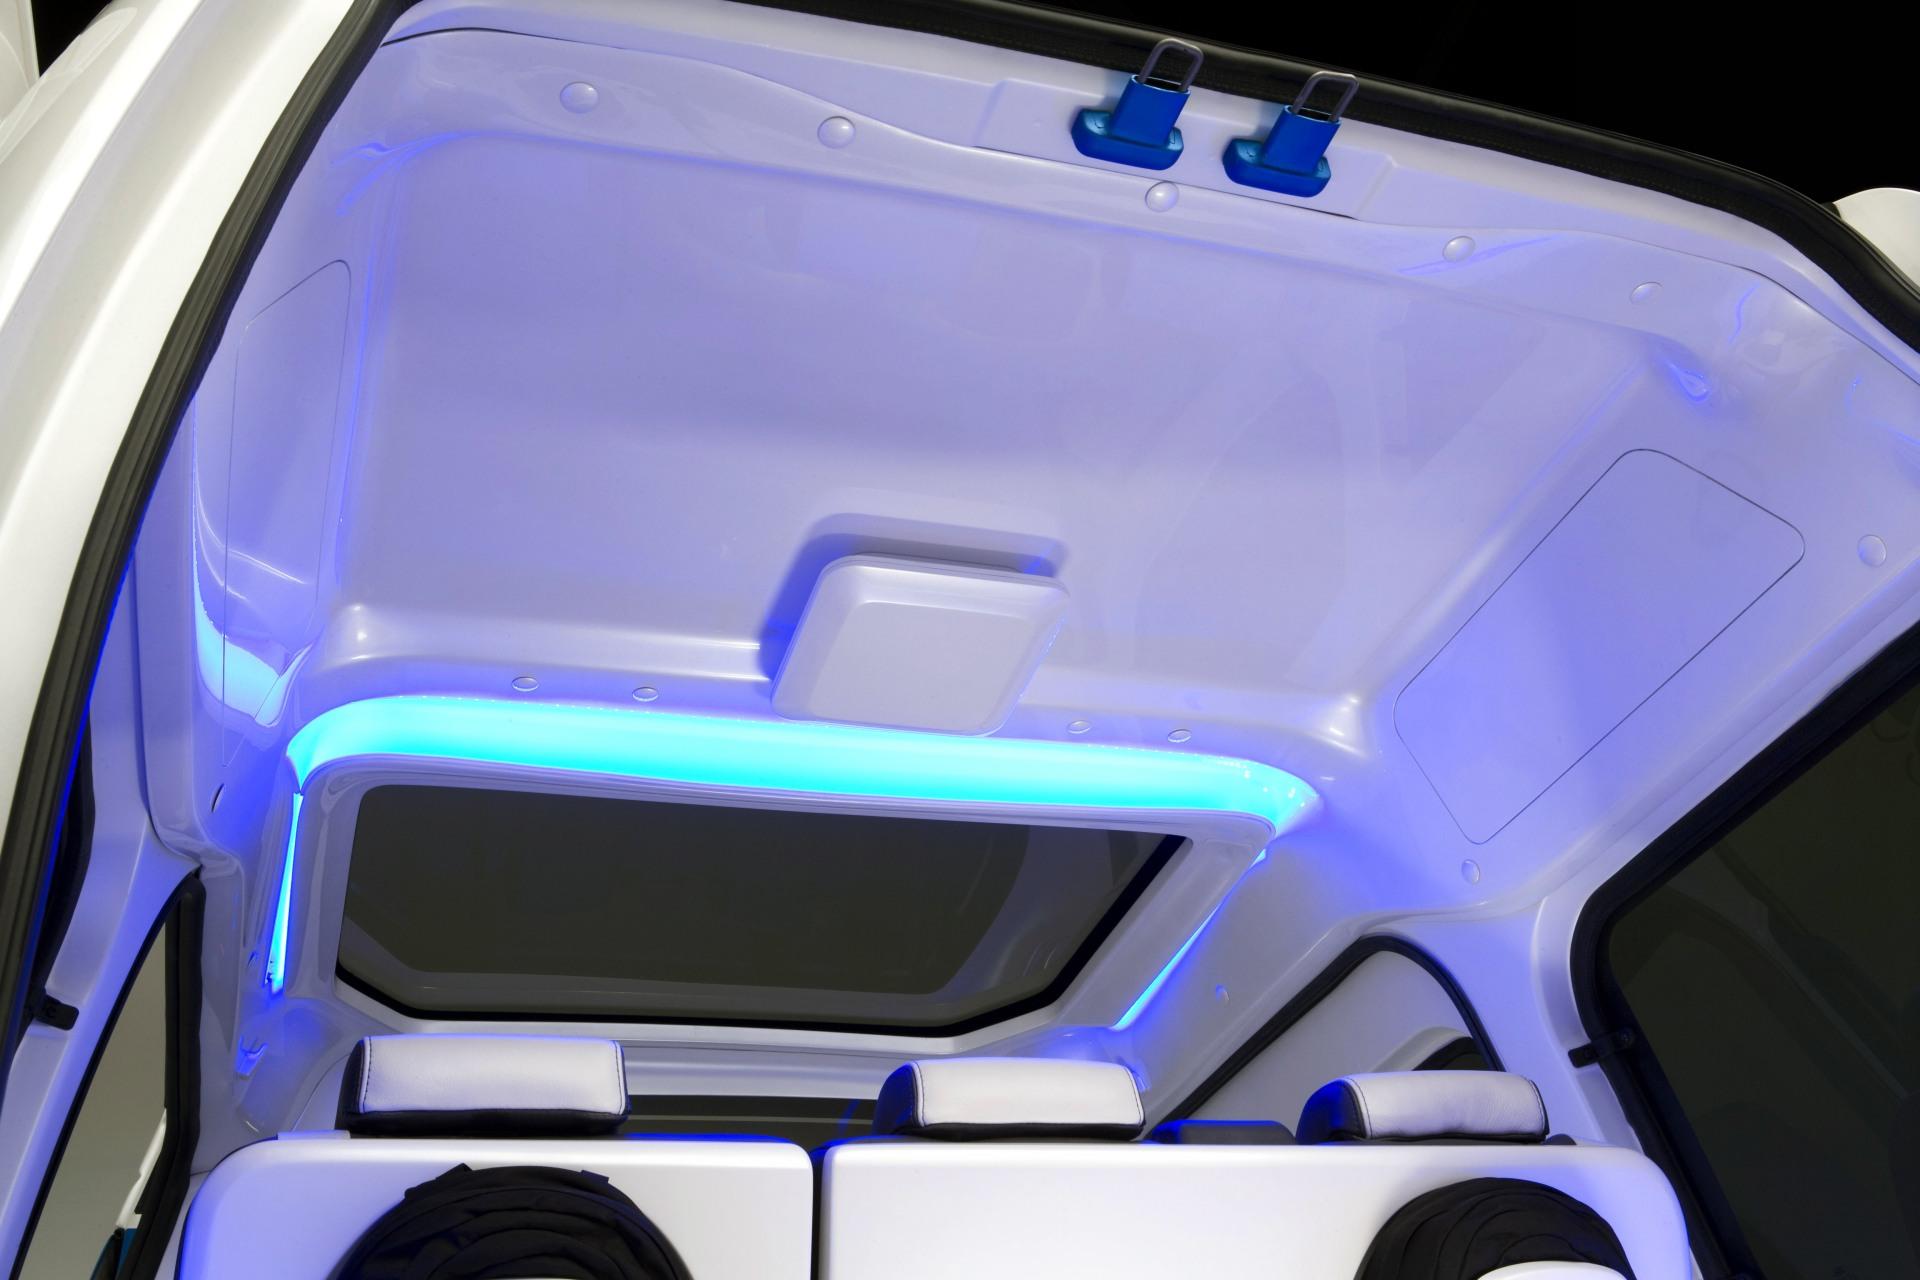 2010 Ford Transit Connect Family One Concept